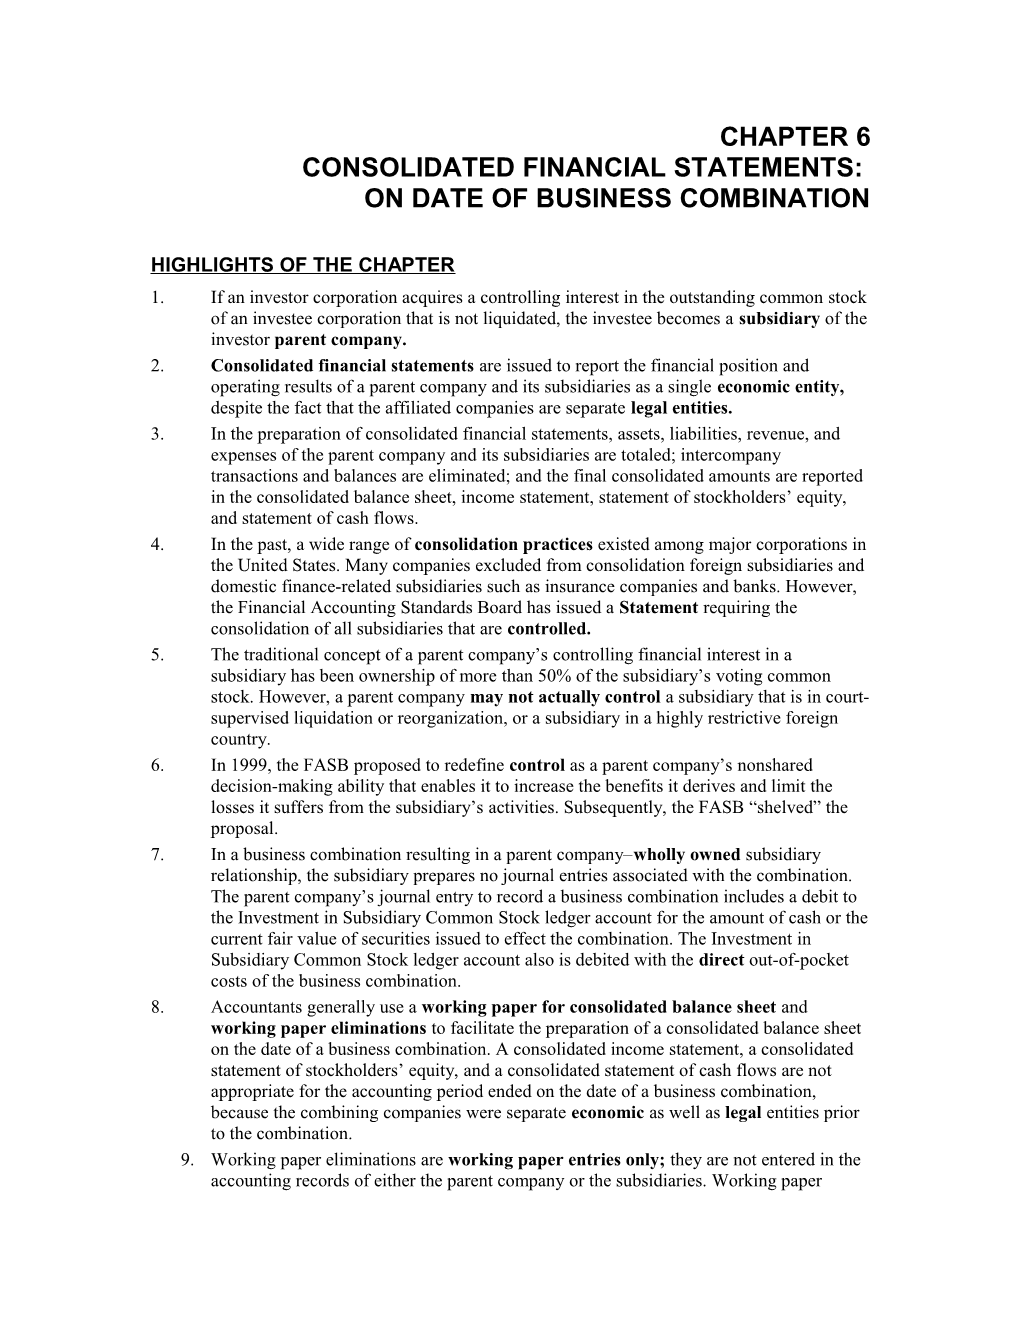 Consolidated Financial Statements: on Date of Business Combination